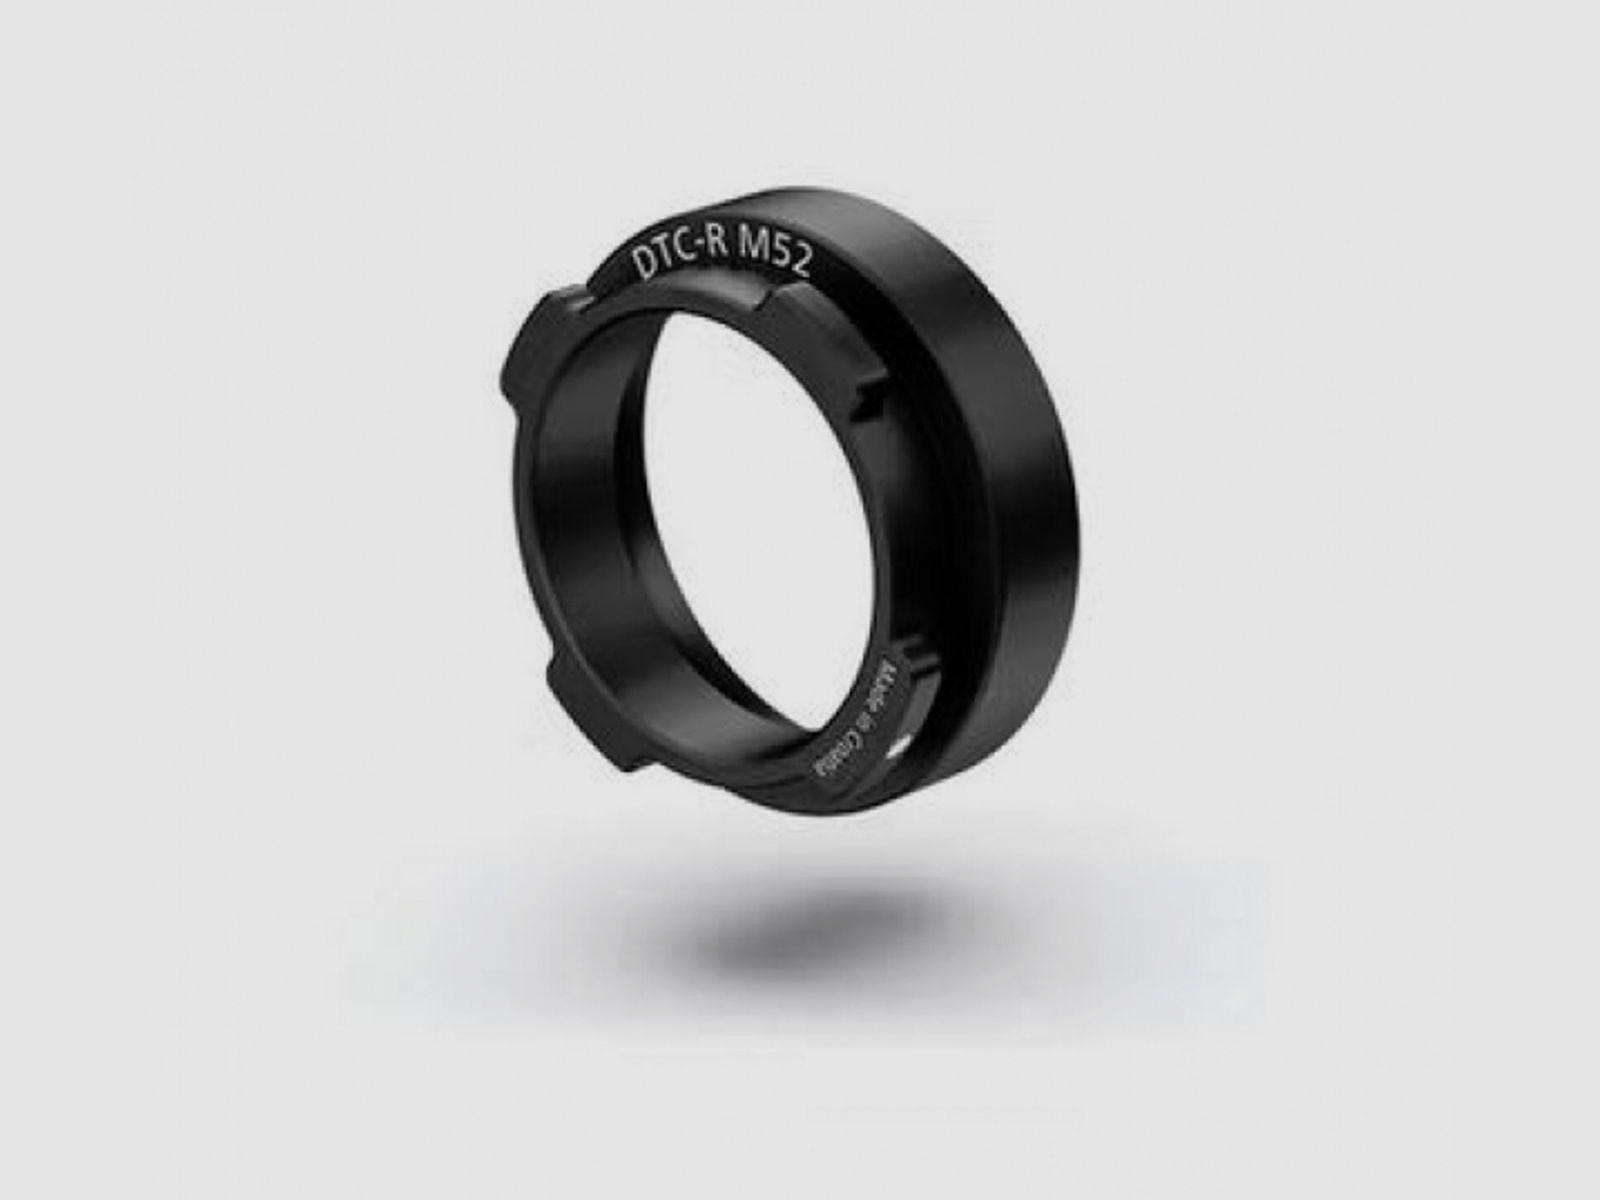 ZEISS DTC-R M52 Ring